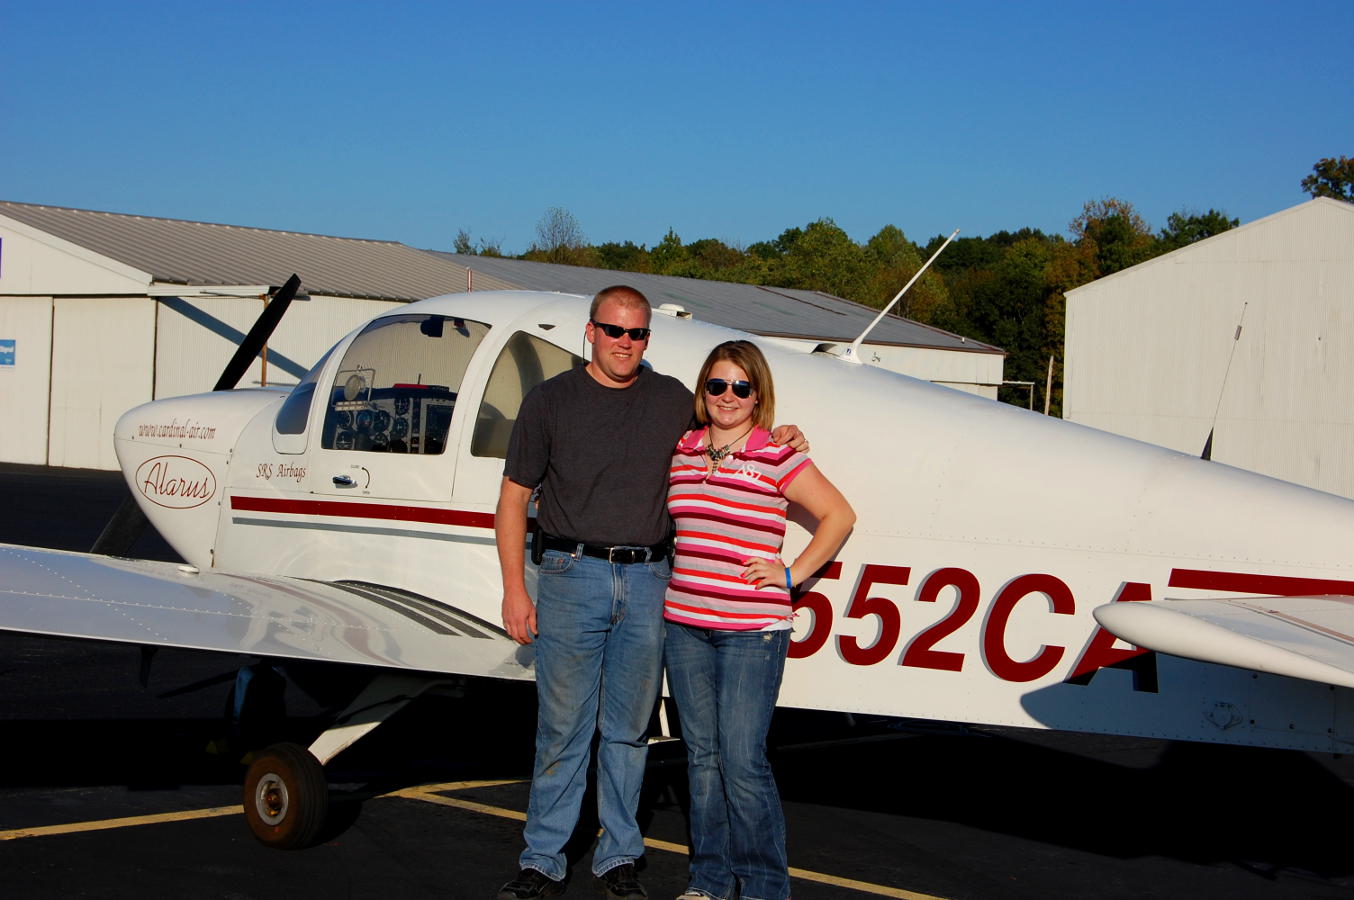 Student pilot and her father in front of a small aircraft - My Discovery Flight